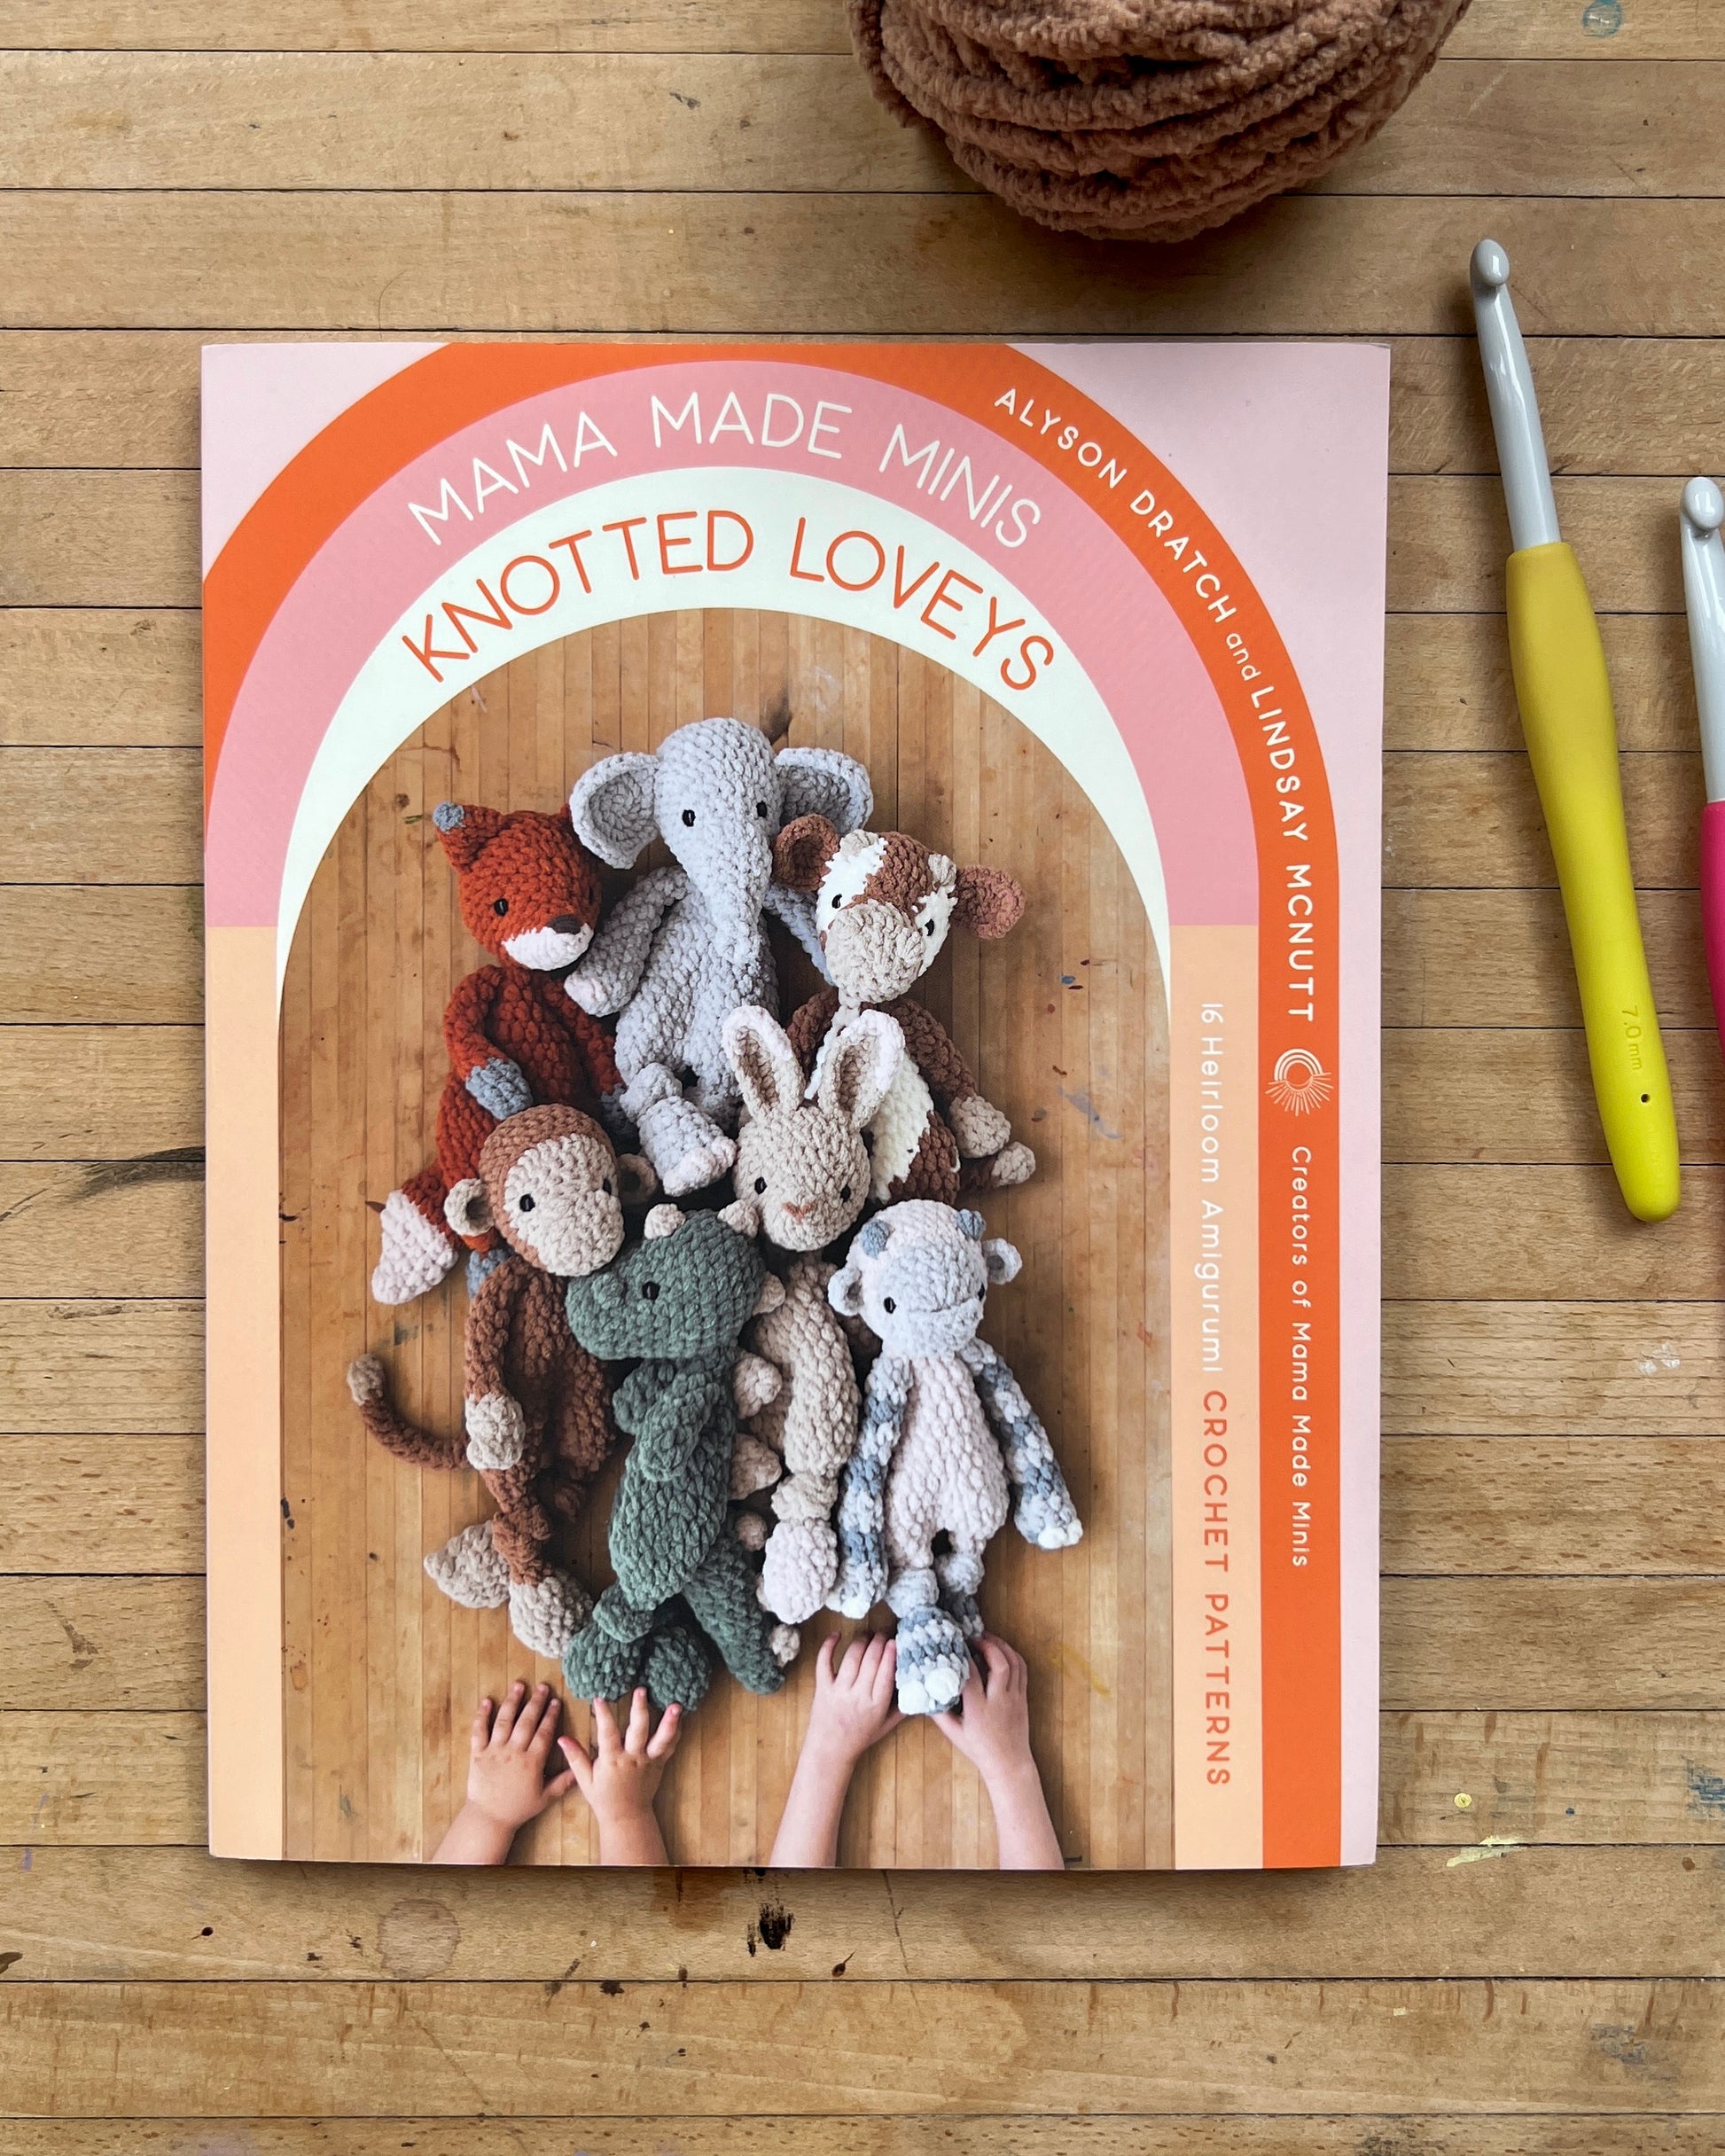 Mama Made Minis Knotted Loveys Book — Signed Edition